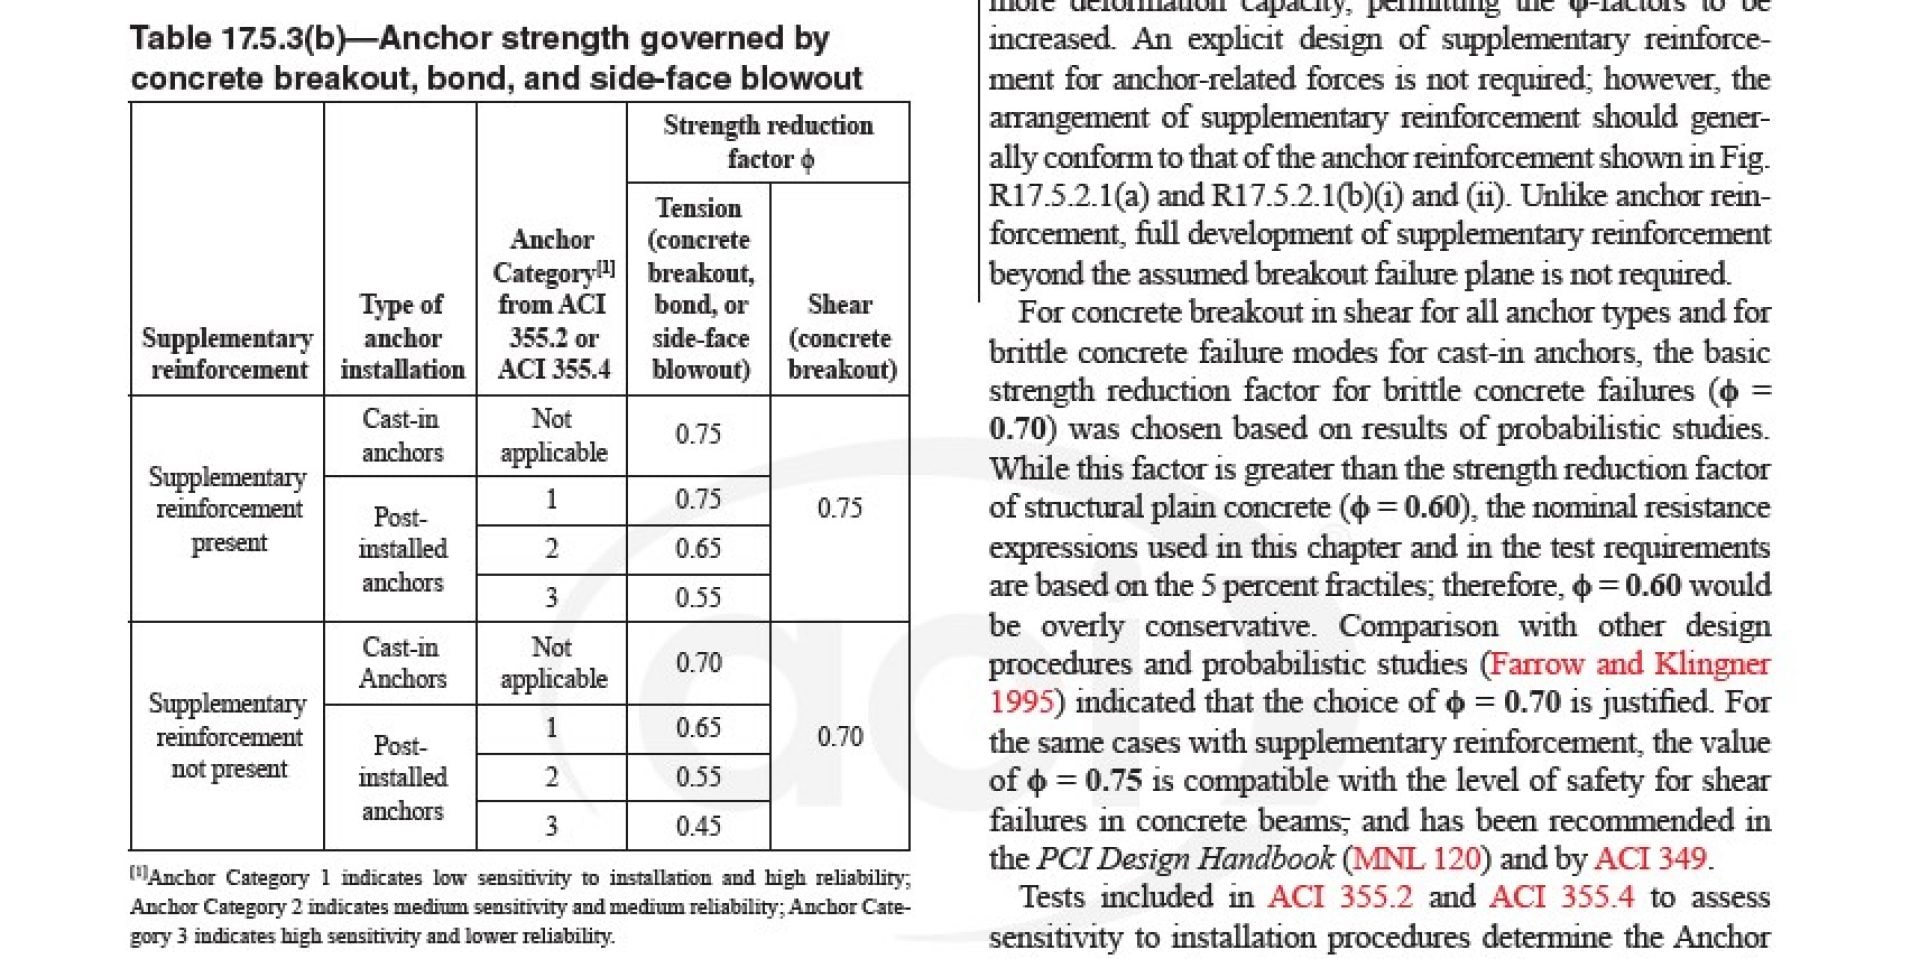 ACI 318-19 Table 17.5.3(b) - Anchor strength governed by concrete breakout, bond, and side-face blowout